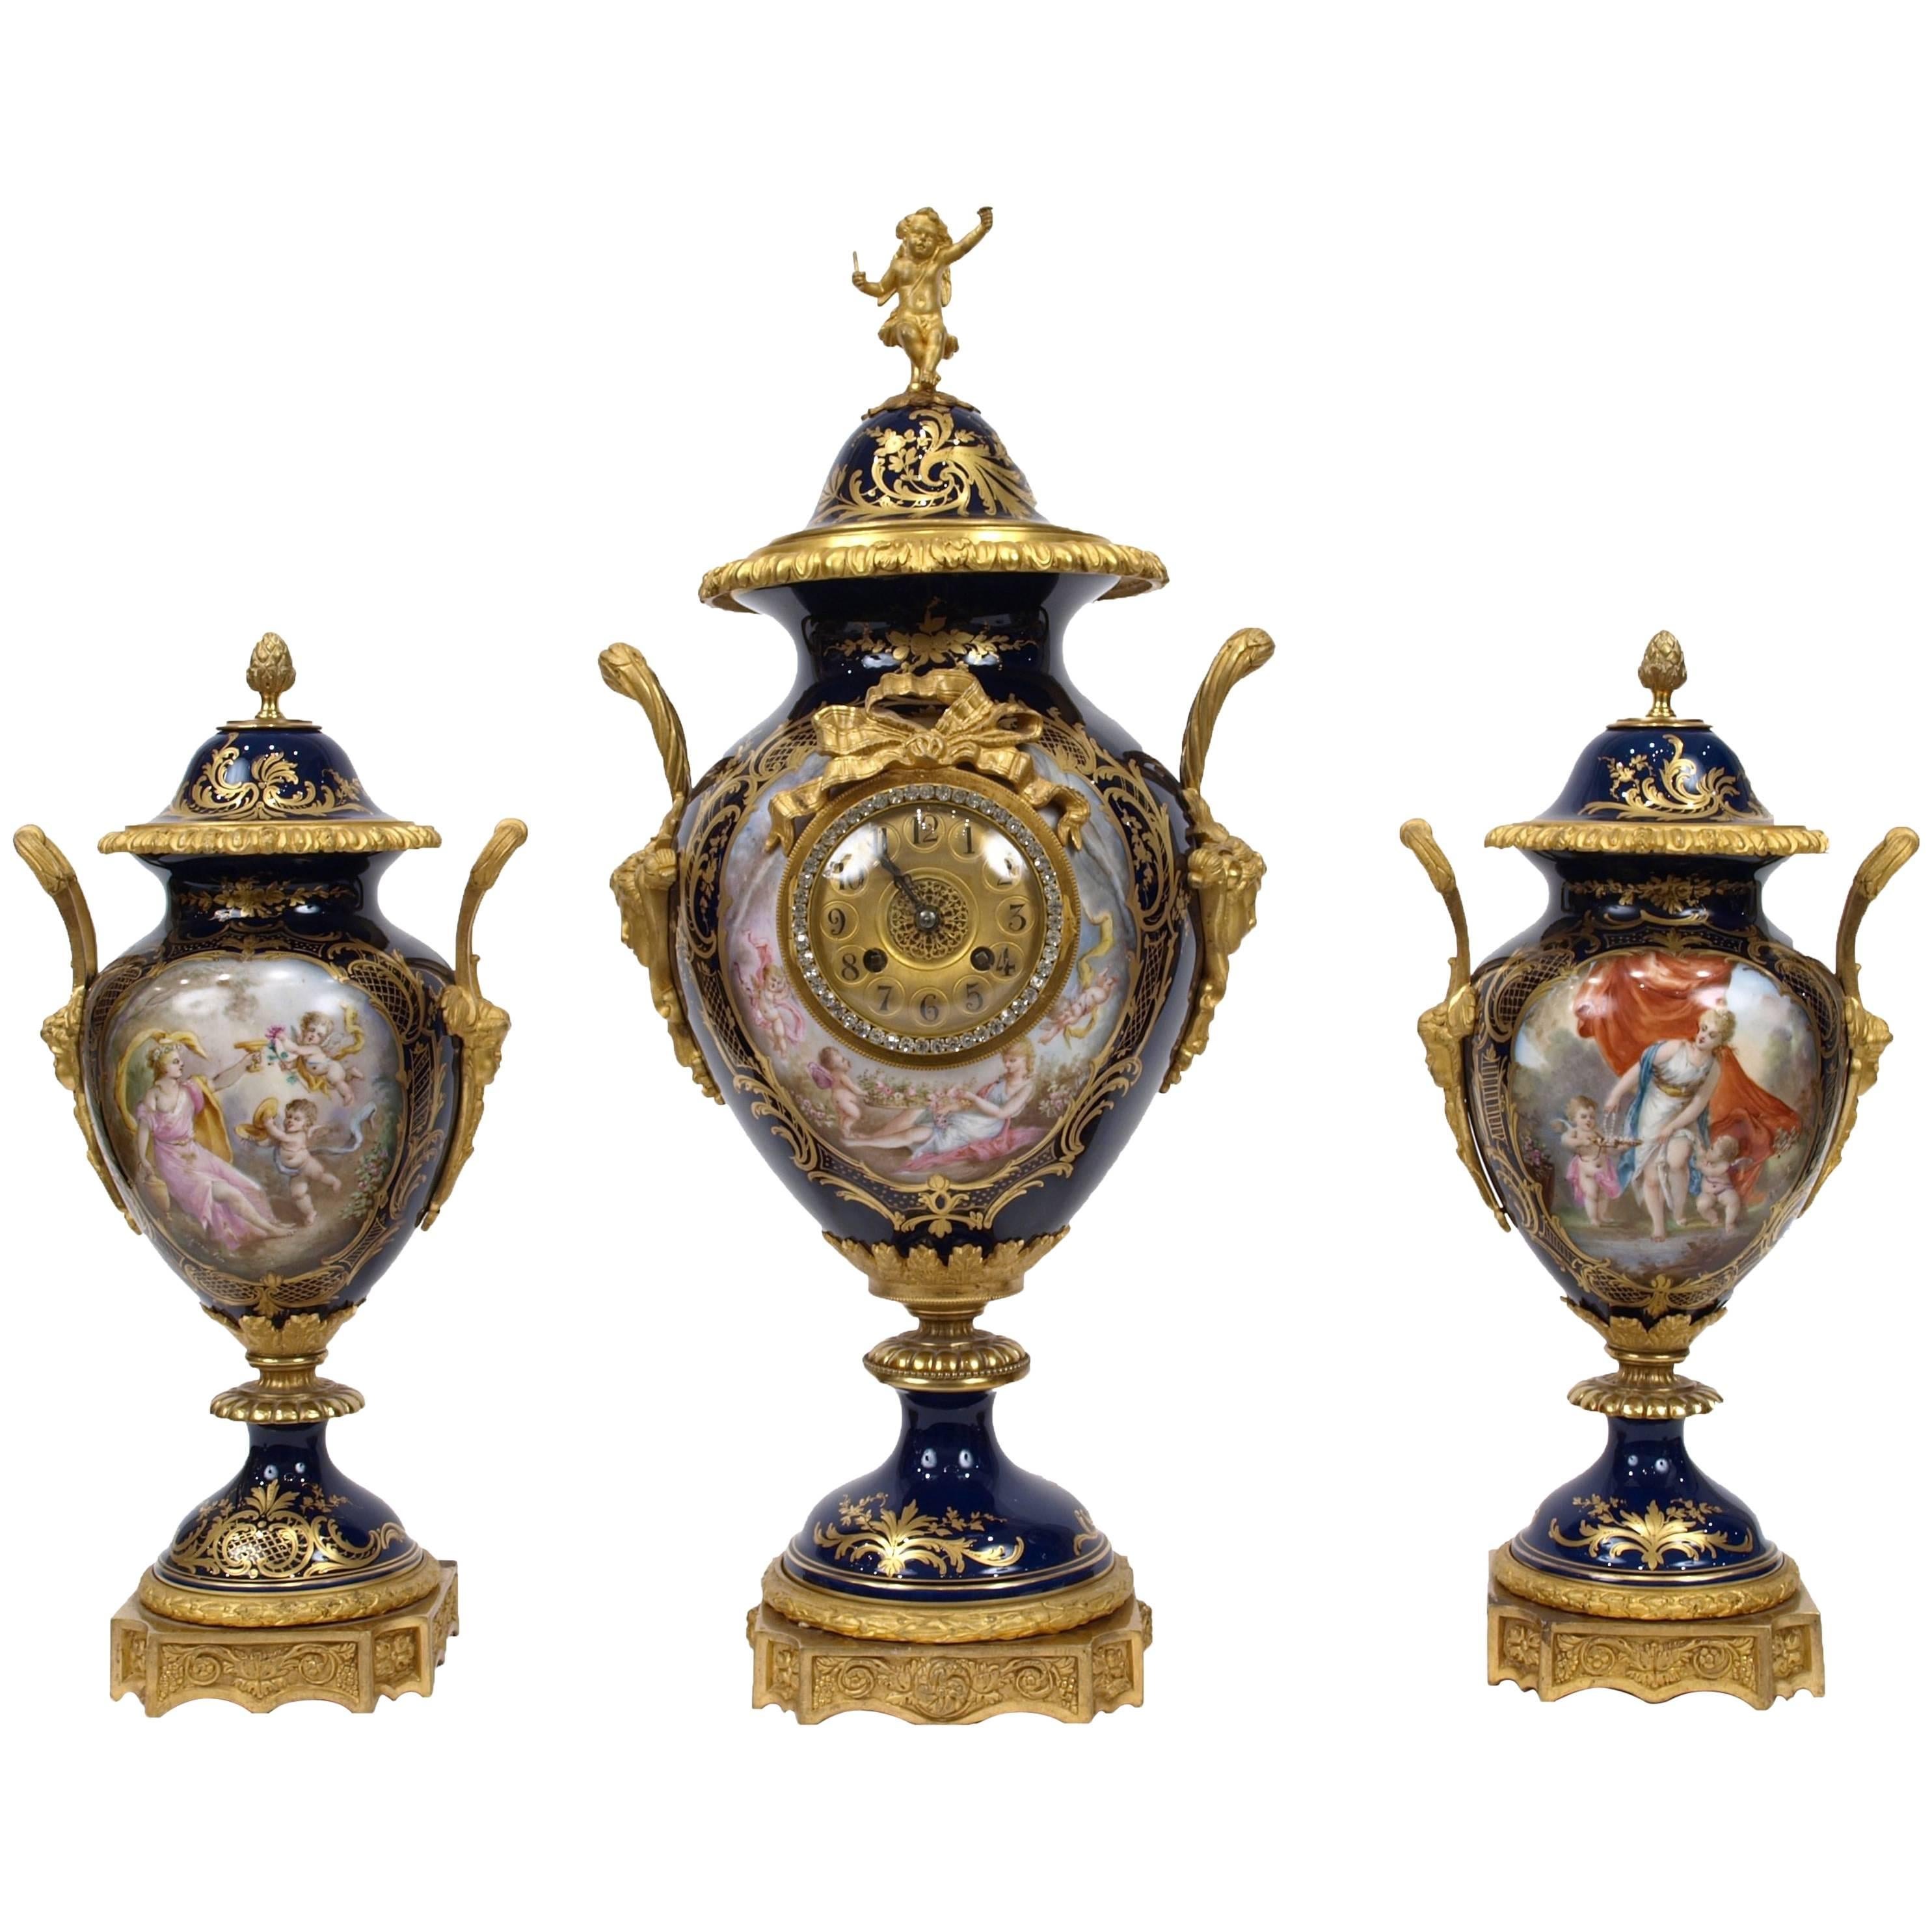 Antique Clock Garniture with Sèvres Style Porcelain and Ormolu